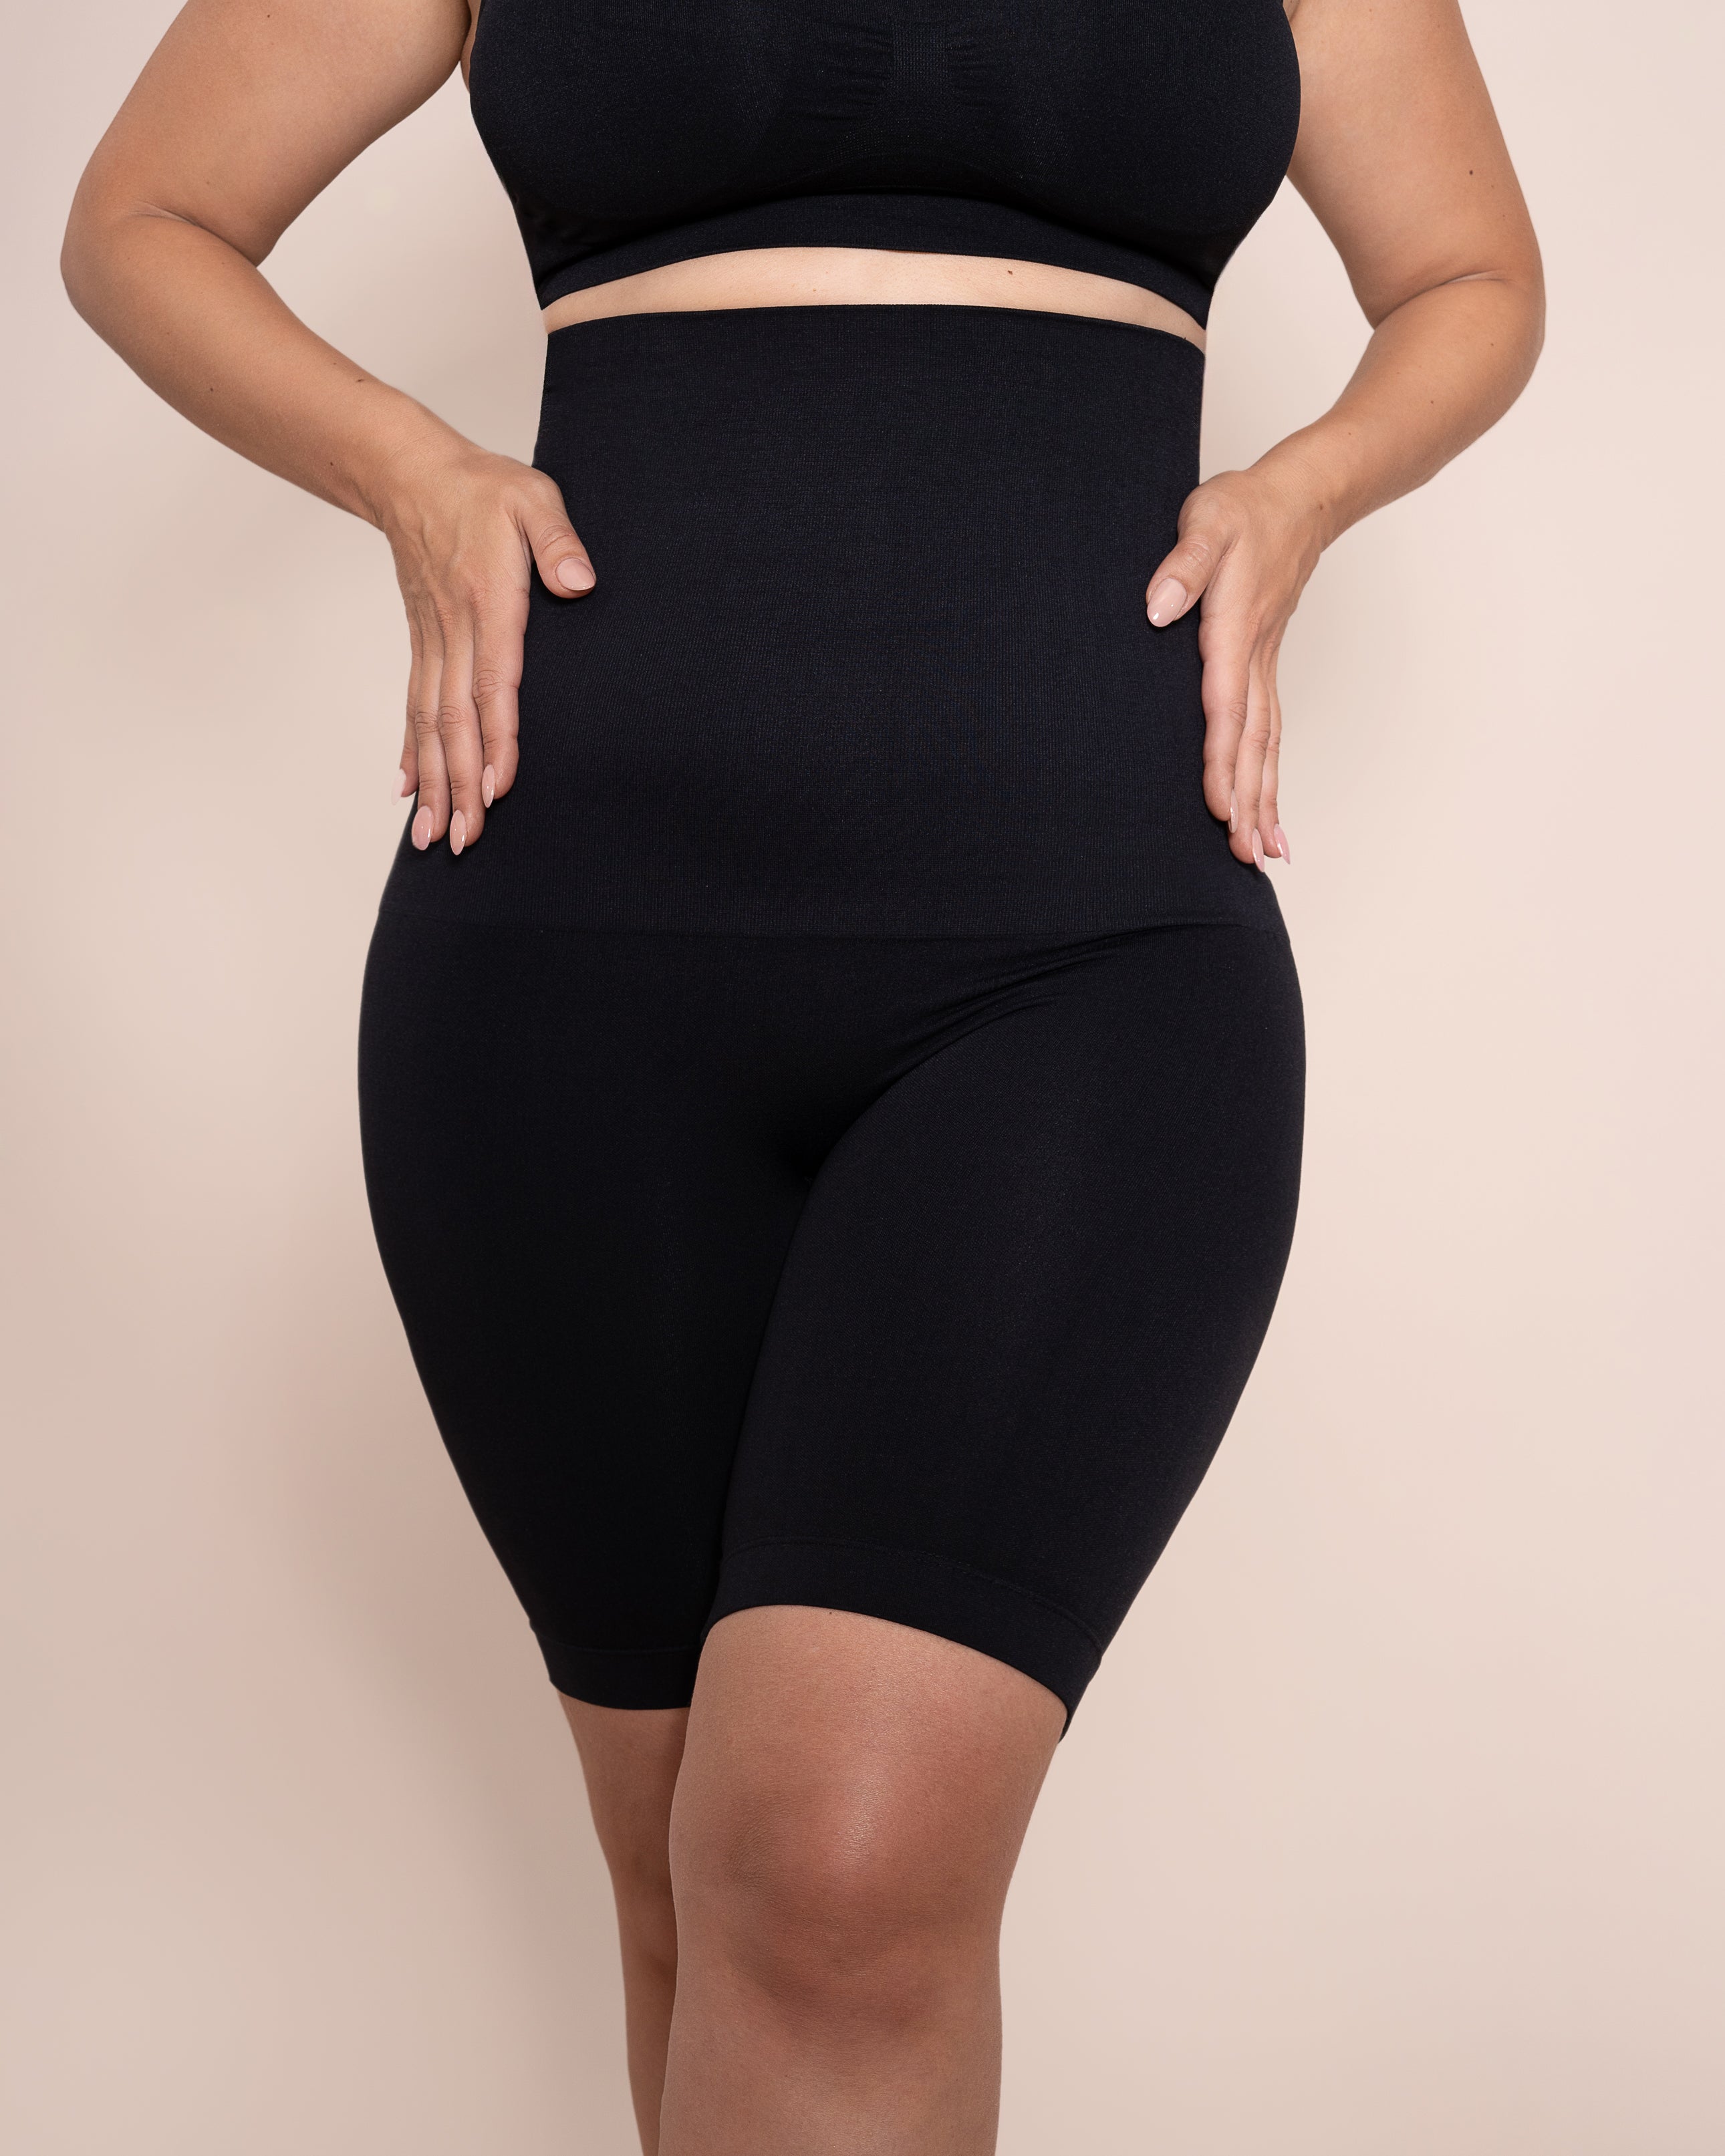 Shapenwear® High Waist Shaper shorts for Everyday use